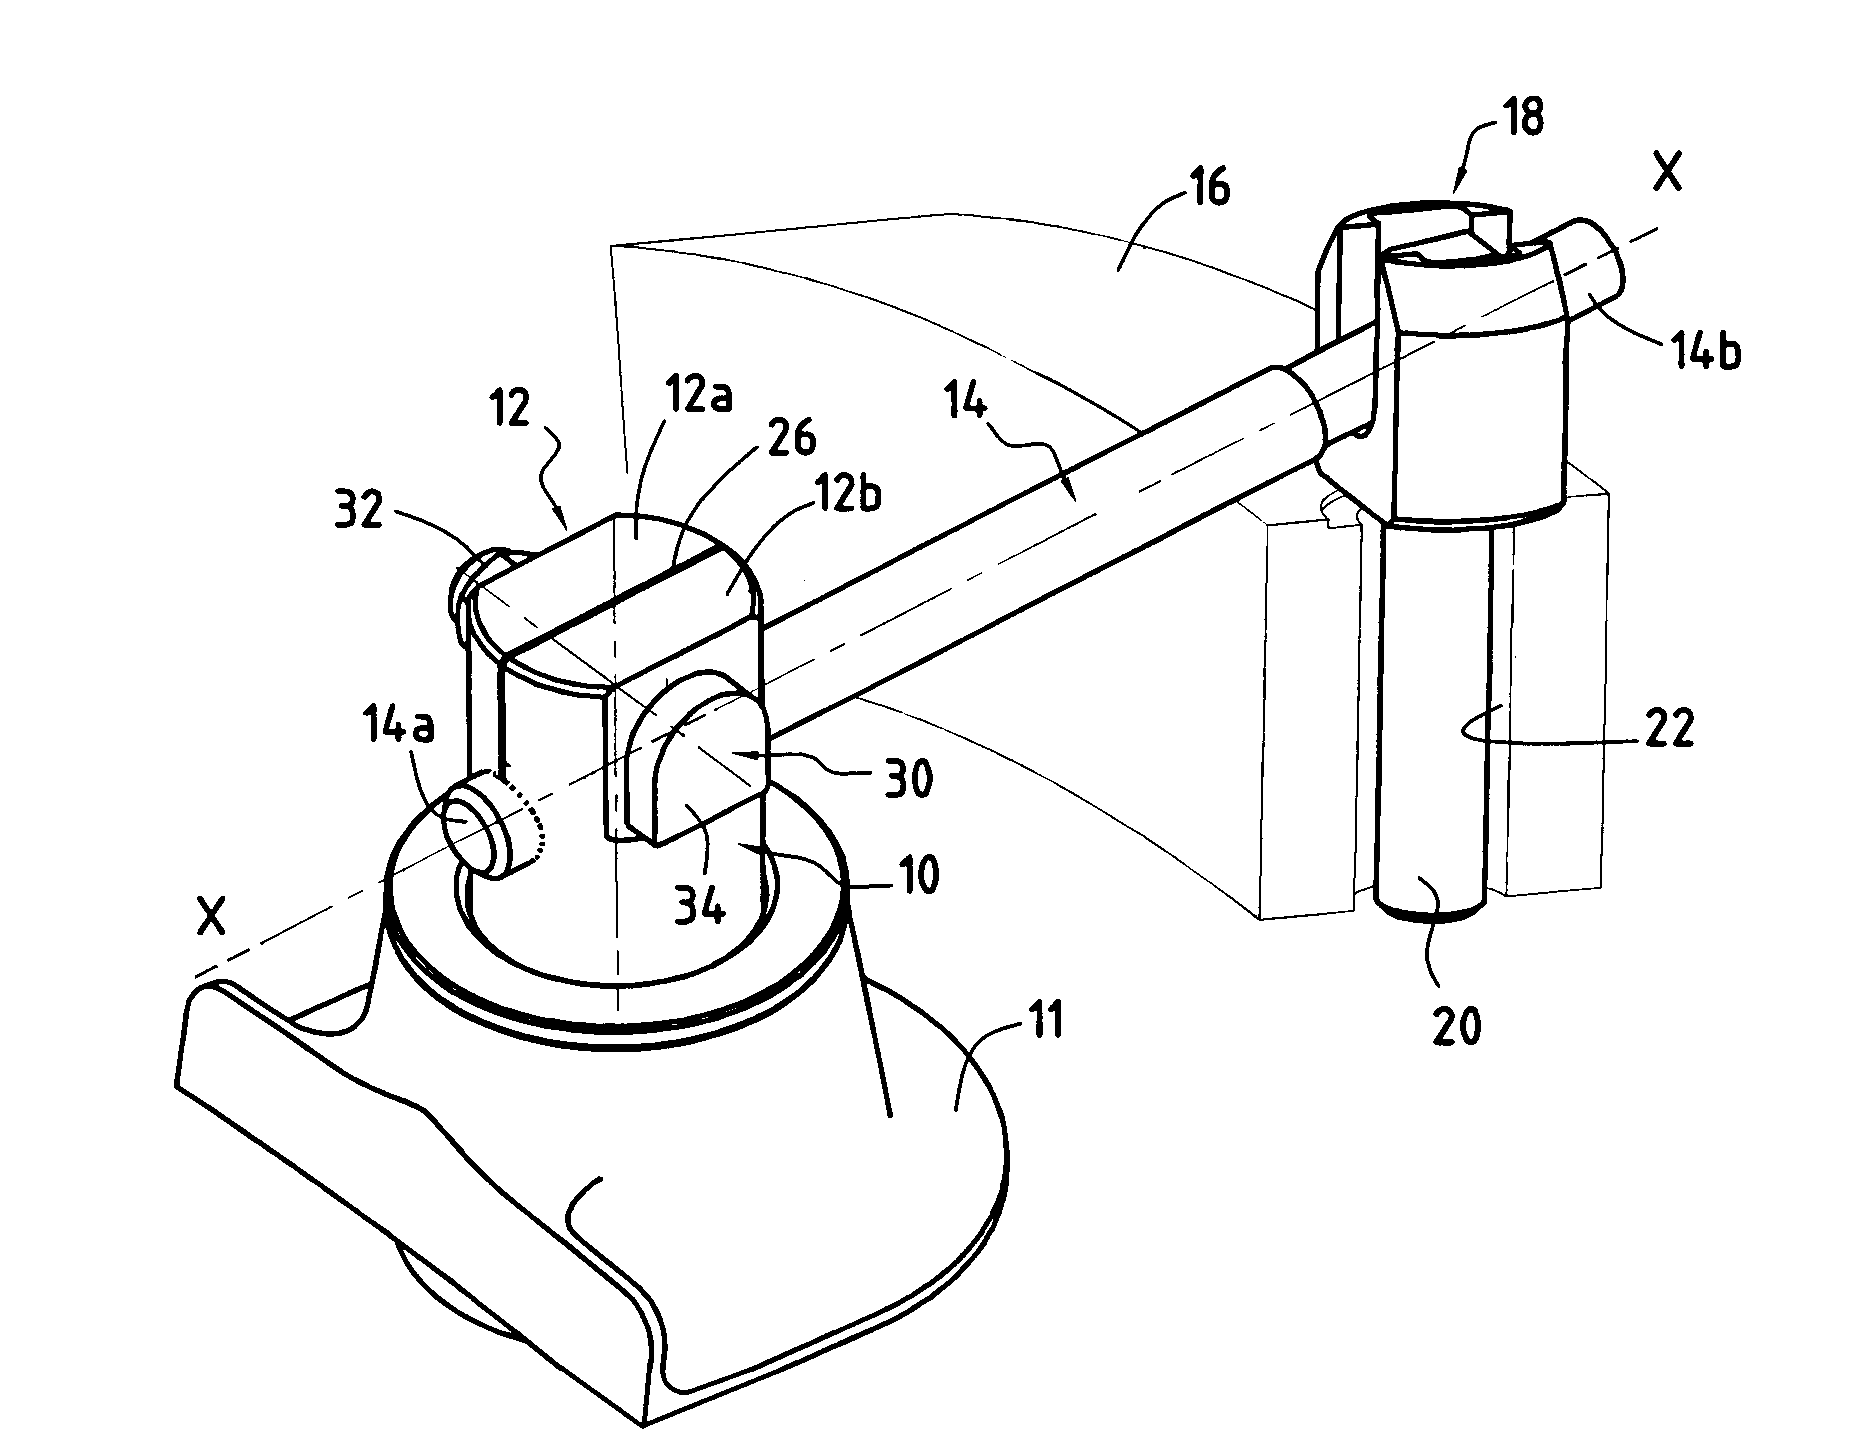 Cylindrical-rod device for controlling a variable-pitch vane of a turbomachine